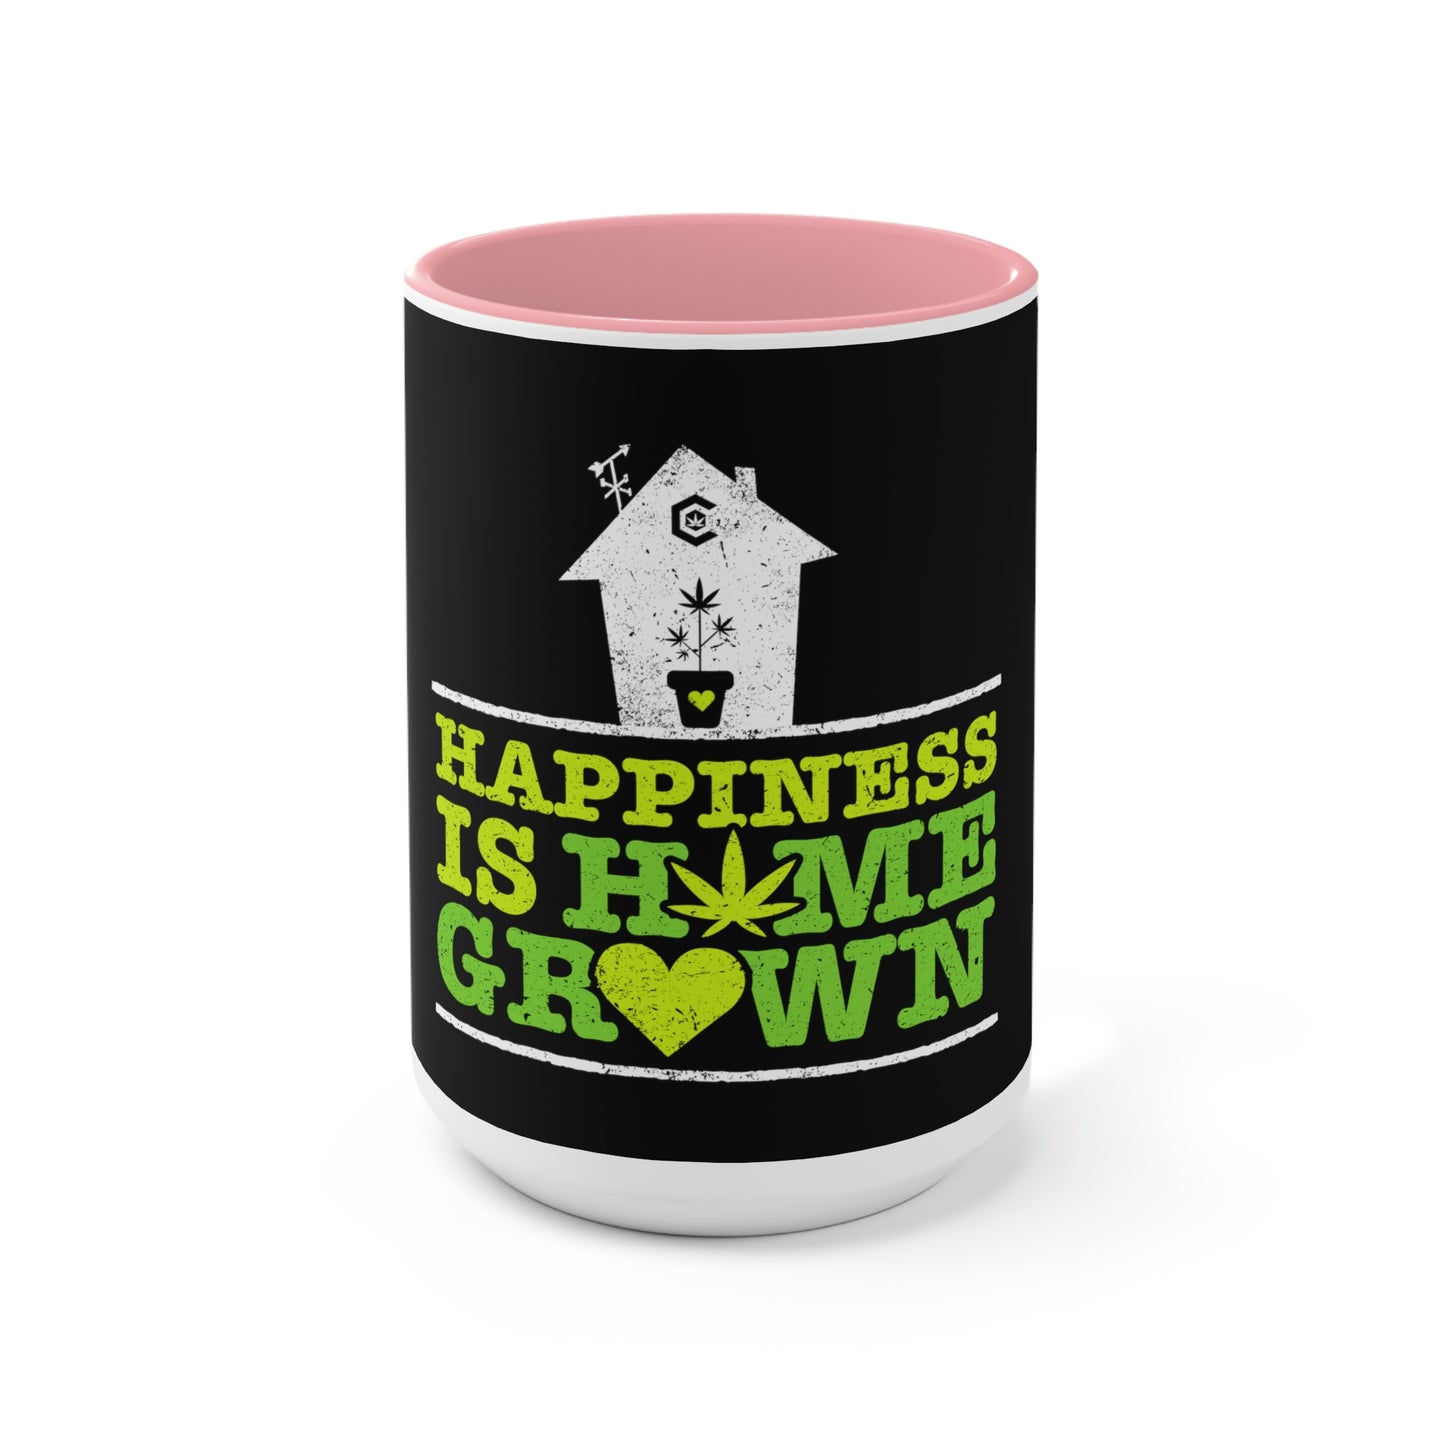 The Happiness Is Homegrown Weed Coffee Mug with pink colorway